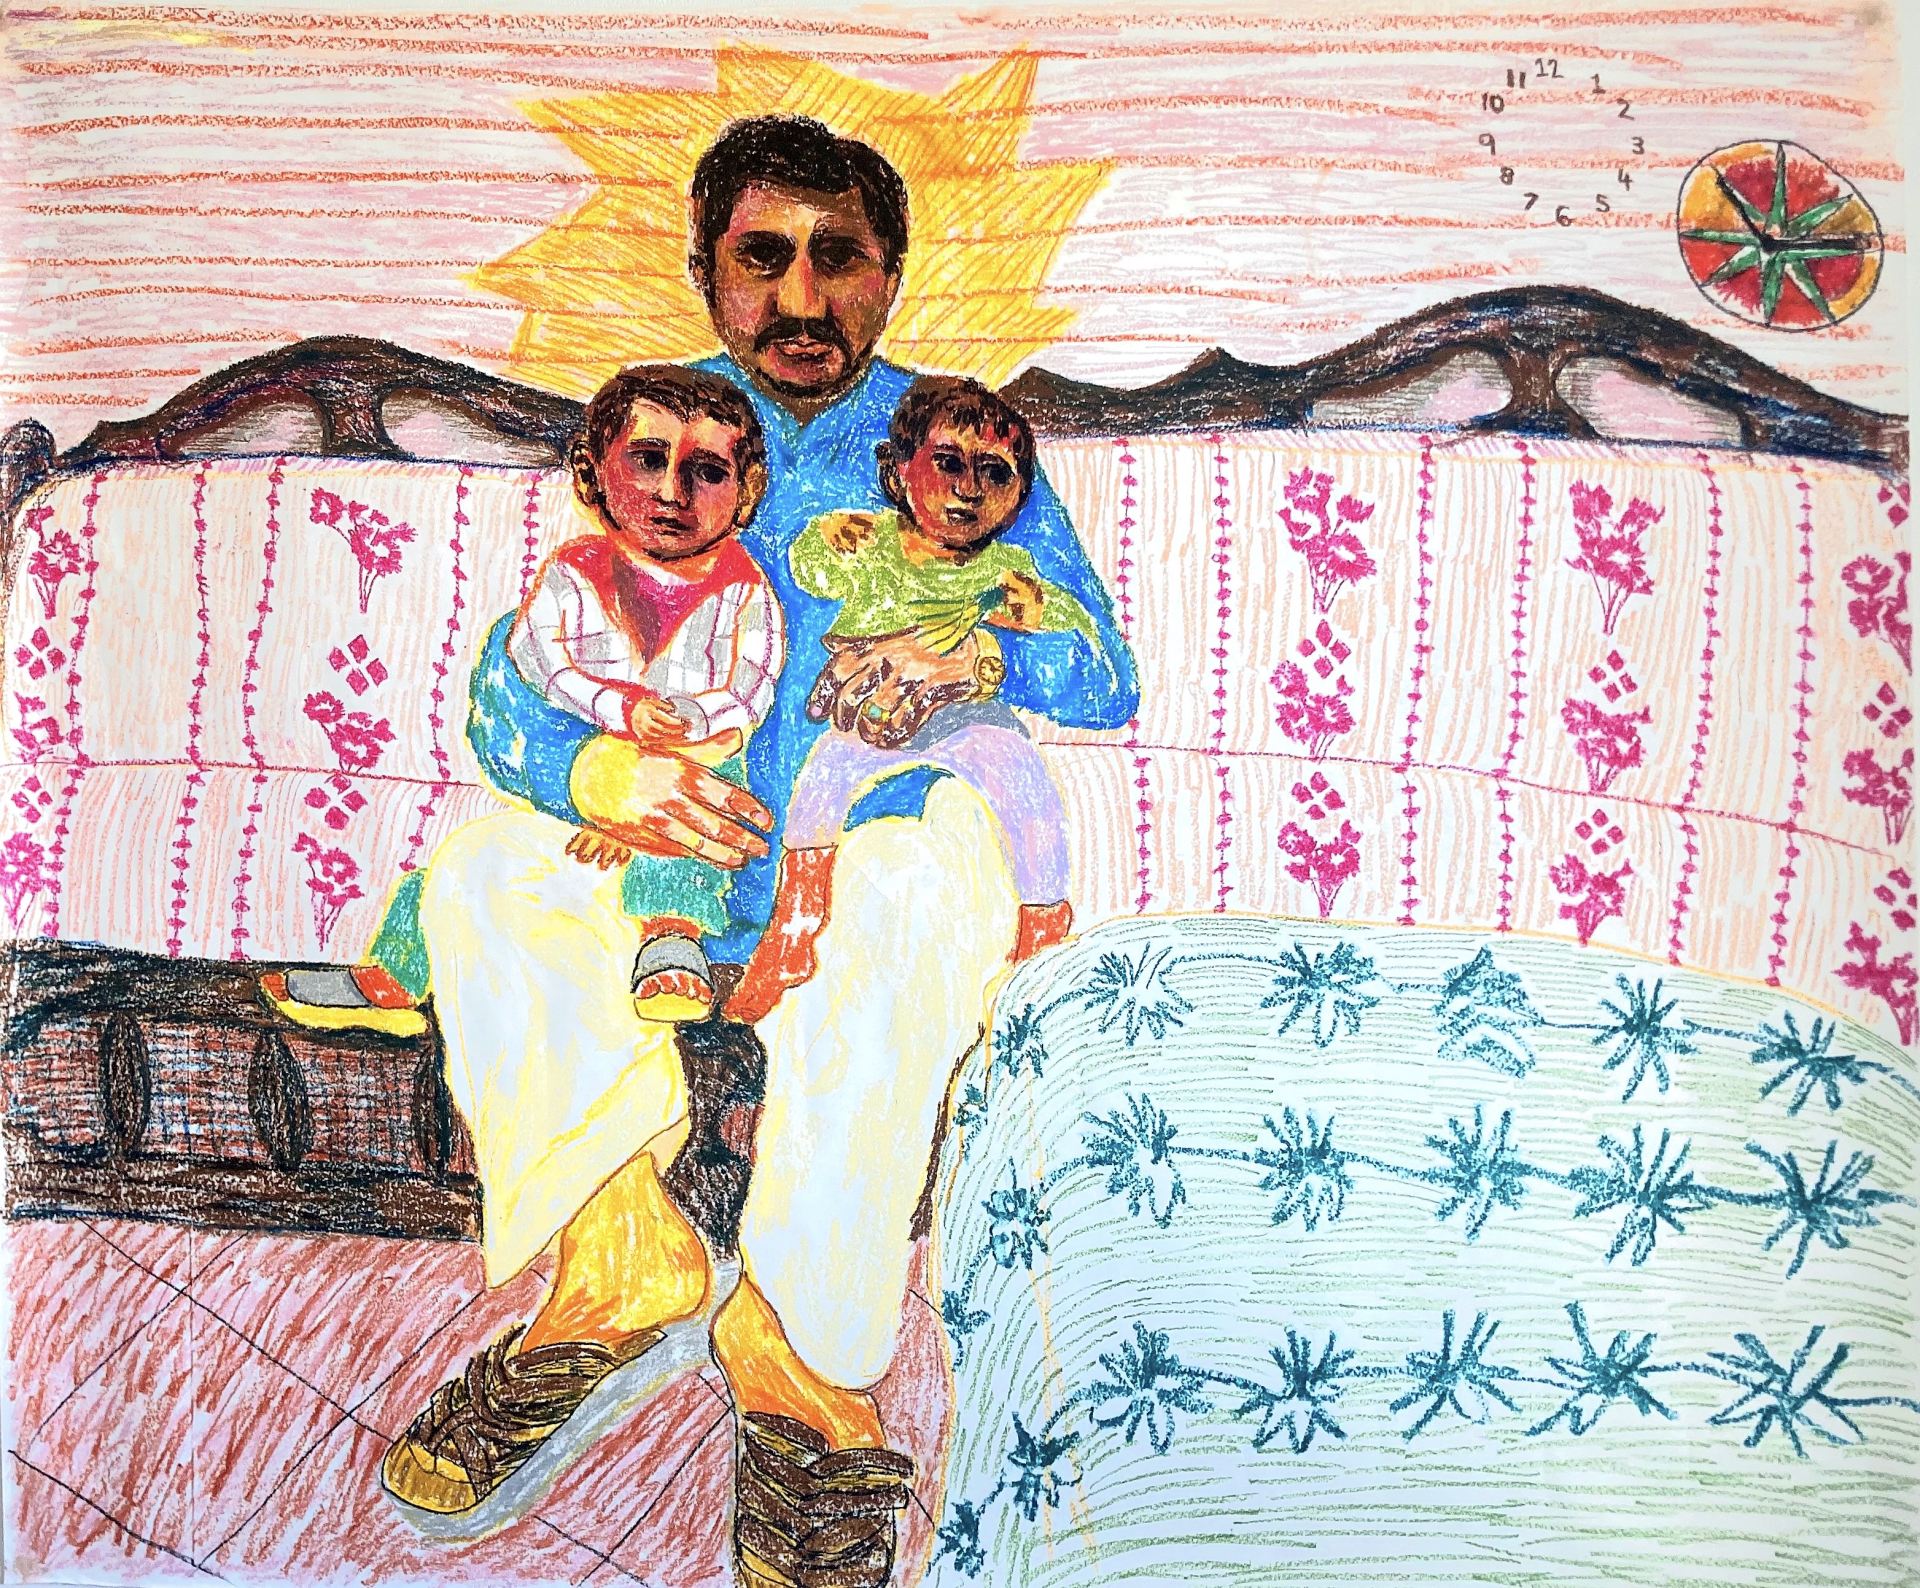 An oil pastel drawing of a man with two children sitting on his lap, surrounded by patterned fabrics and furniture. 